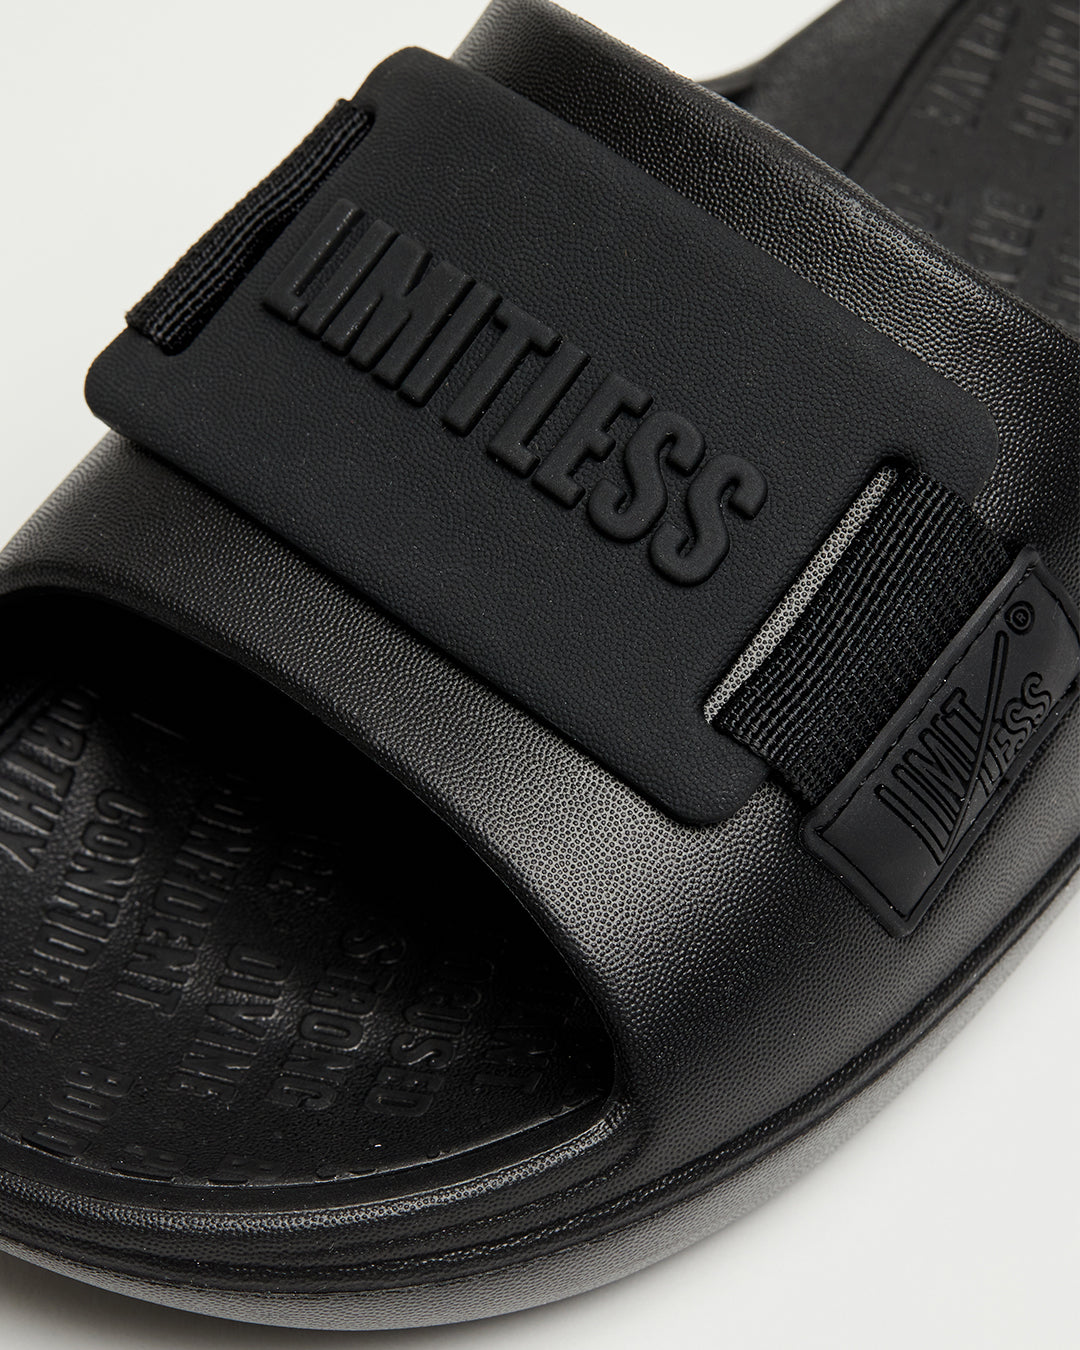 LIMITLESS SLIDES™ WITH ESSENTIAL TIBAH™ QUAD - WHITNEY YOUNG POMS EDITION